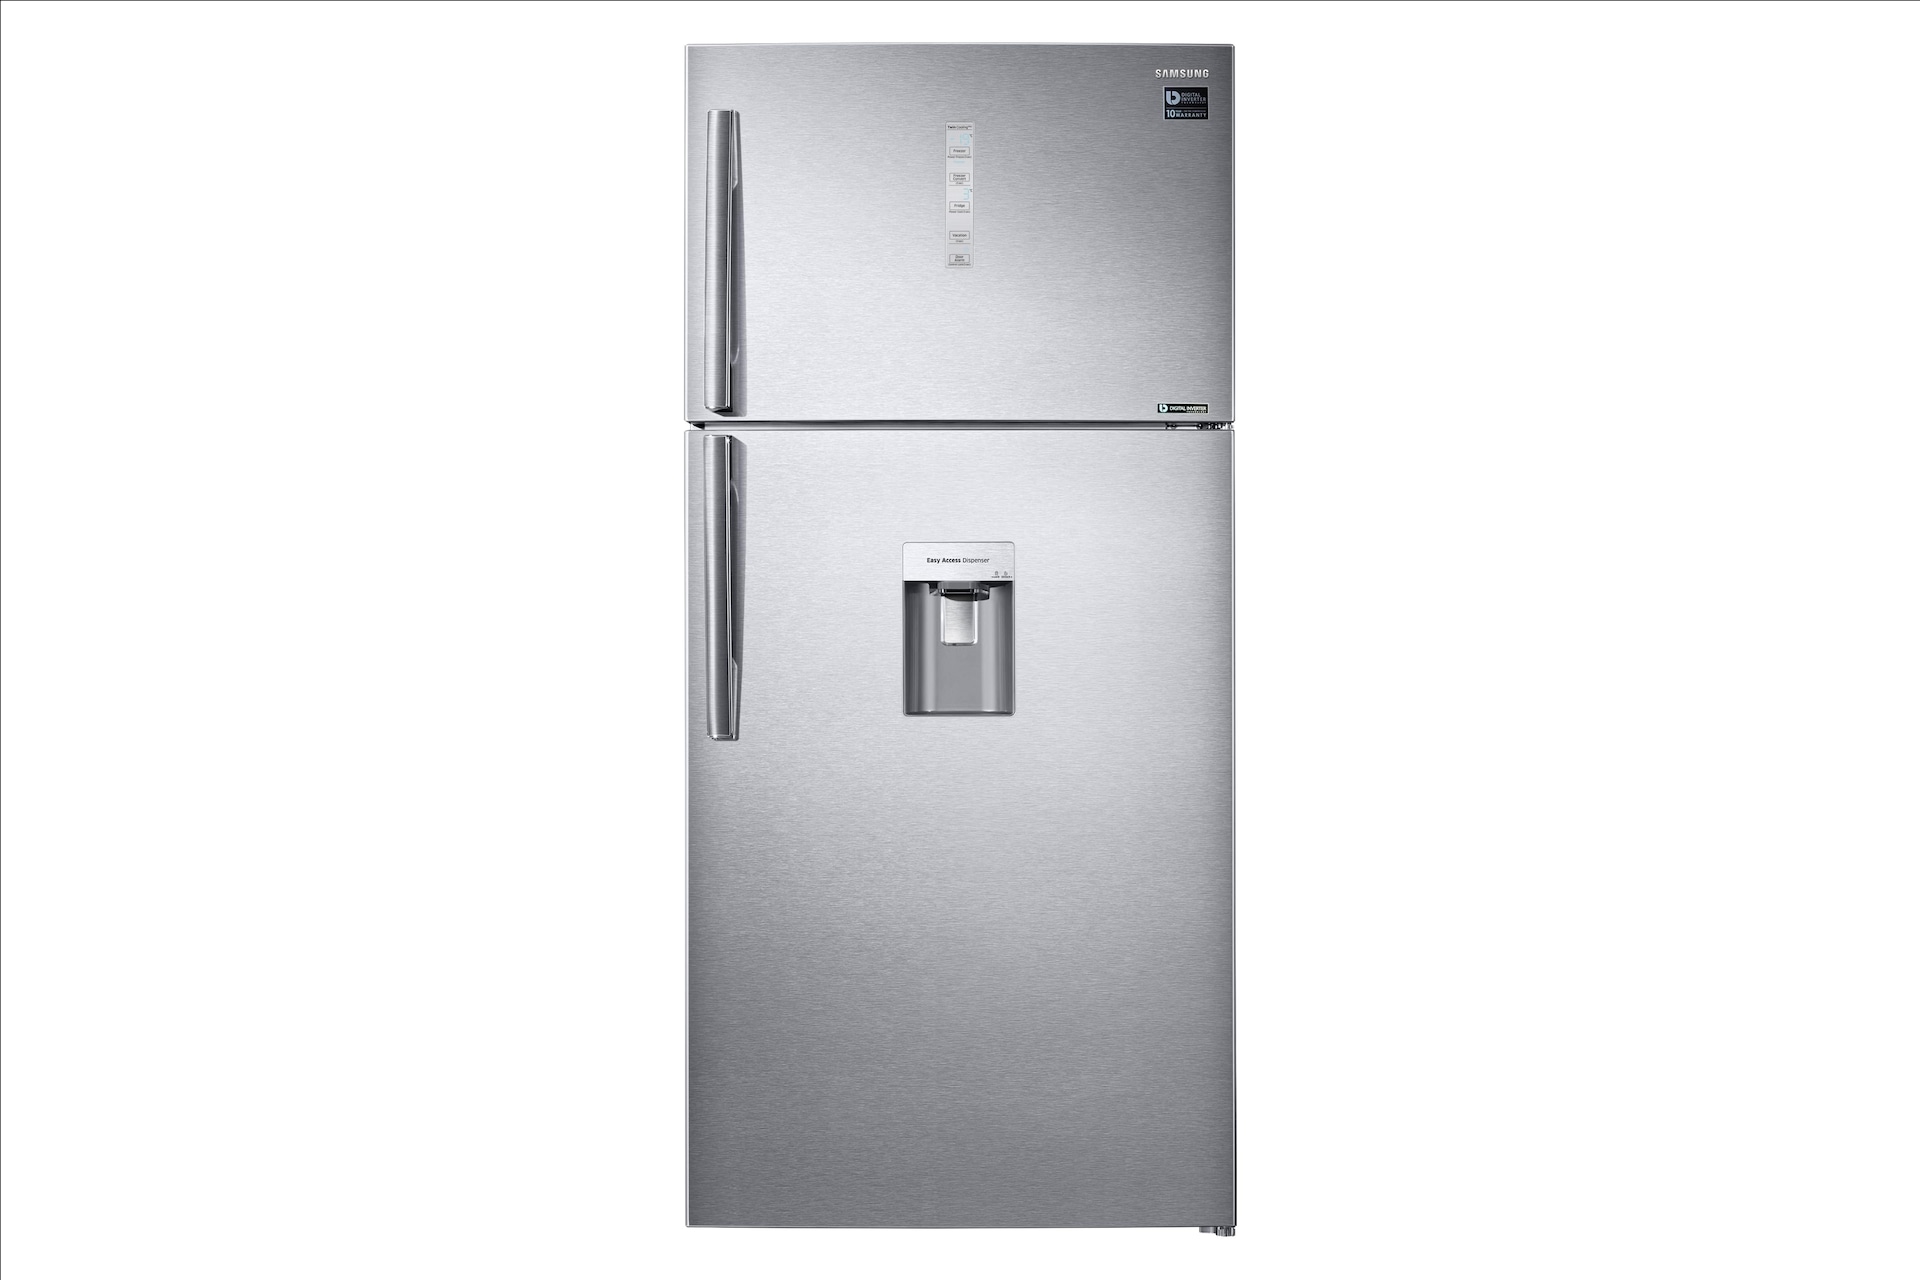 Samsung Top Freezer Fridge, with Twin Cooling System, Clean Steel,499L in Silver (RT50K6531SL/FA)